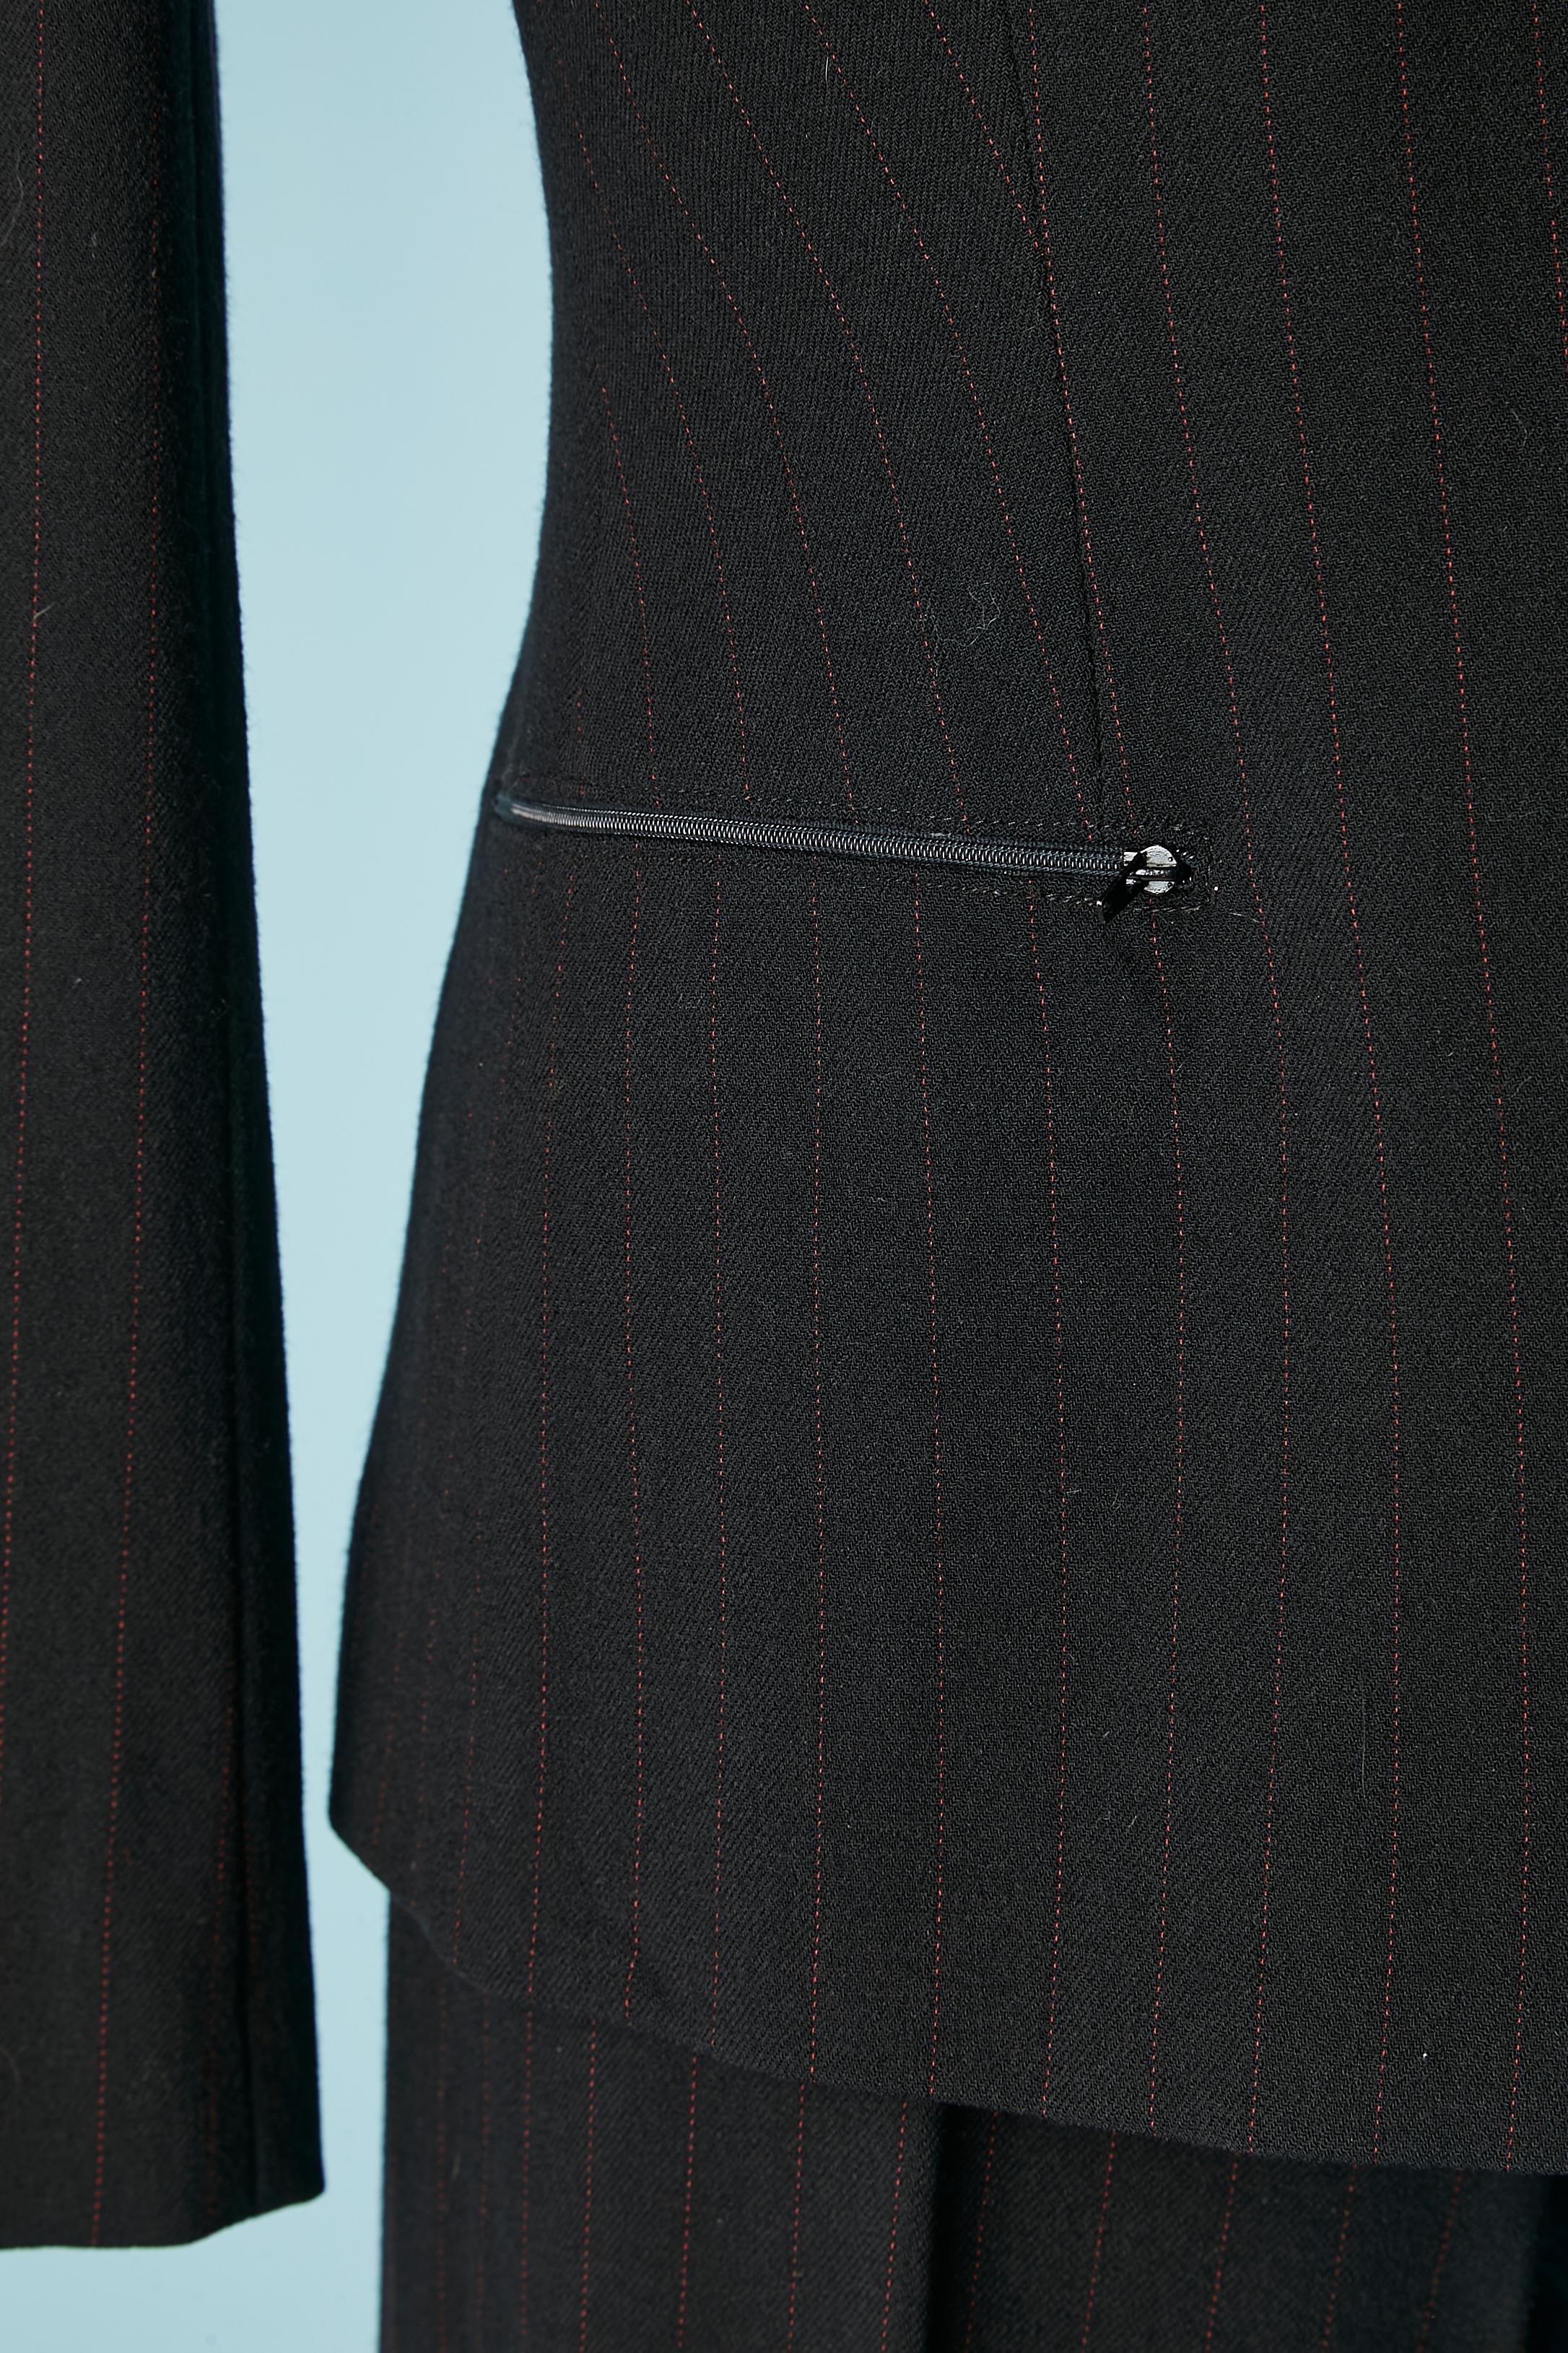 Black wool and red pin-stripes trouser-suit and fur vest. Main fabric composition: 95% wool, 4% elastane, 1% polyester. Lining: 62% rayon, 38% polyester. The fur is razor cut in horizontal stripes.
Zip closure in the middle front and pockets. Double